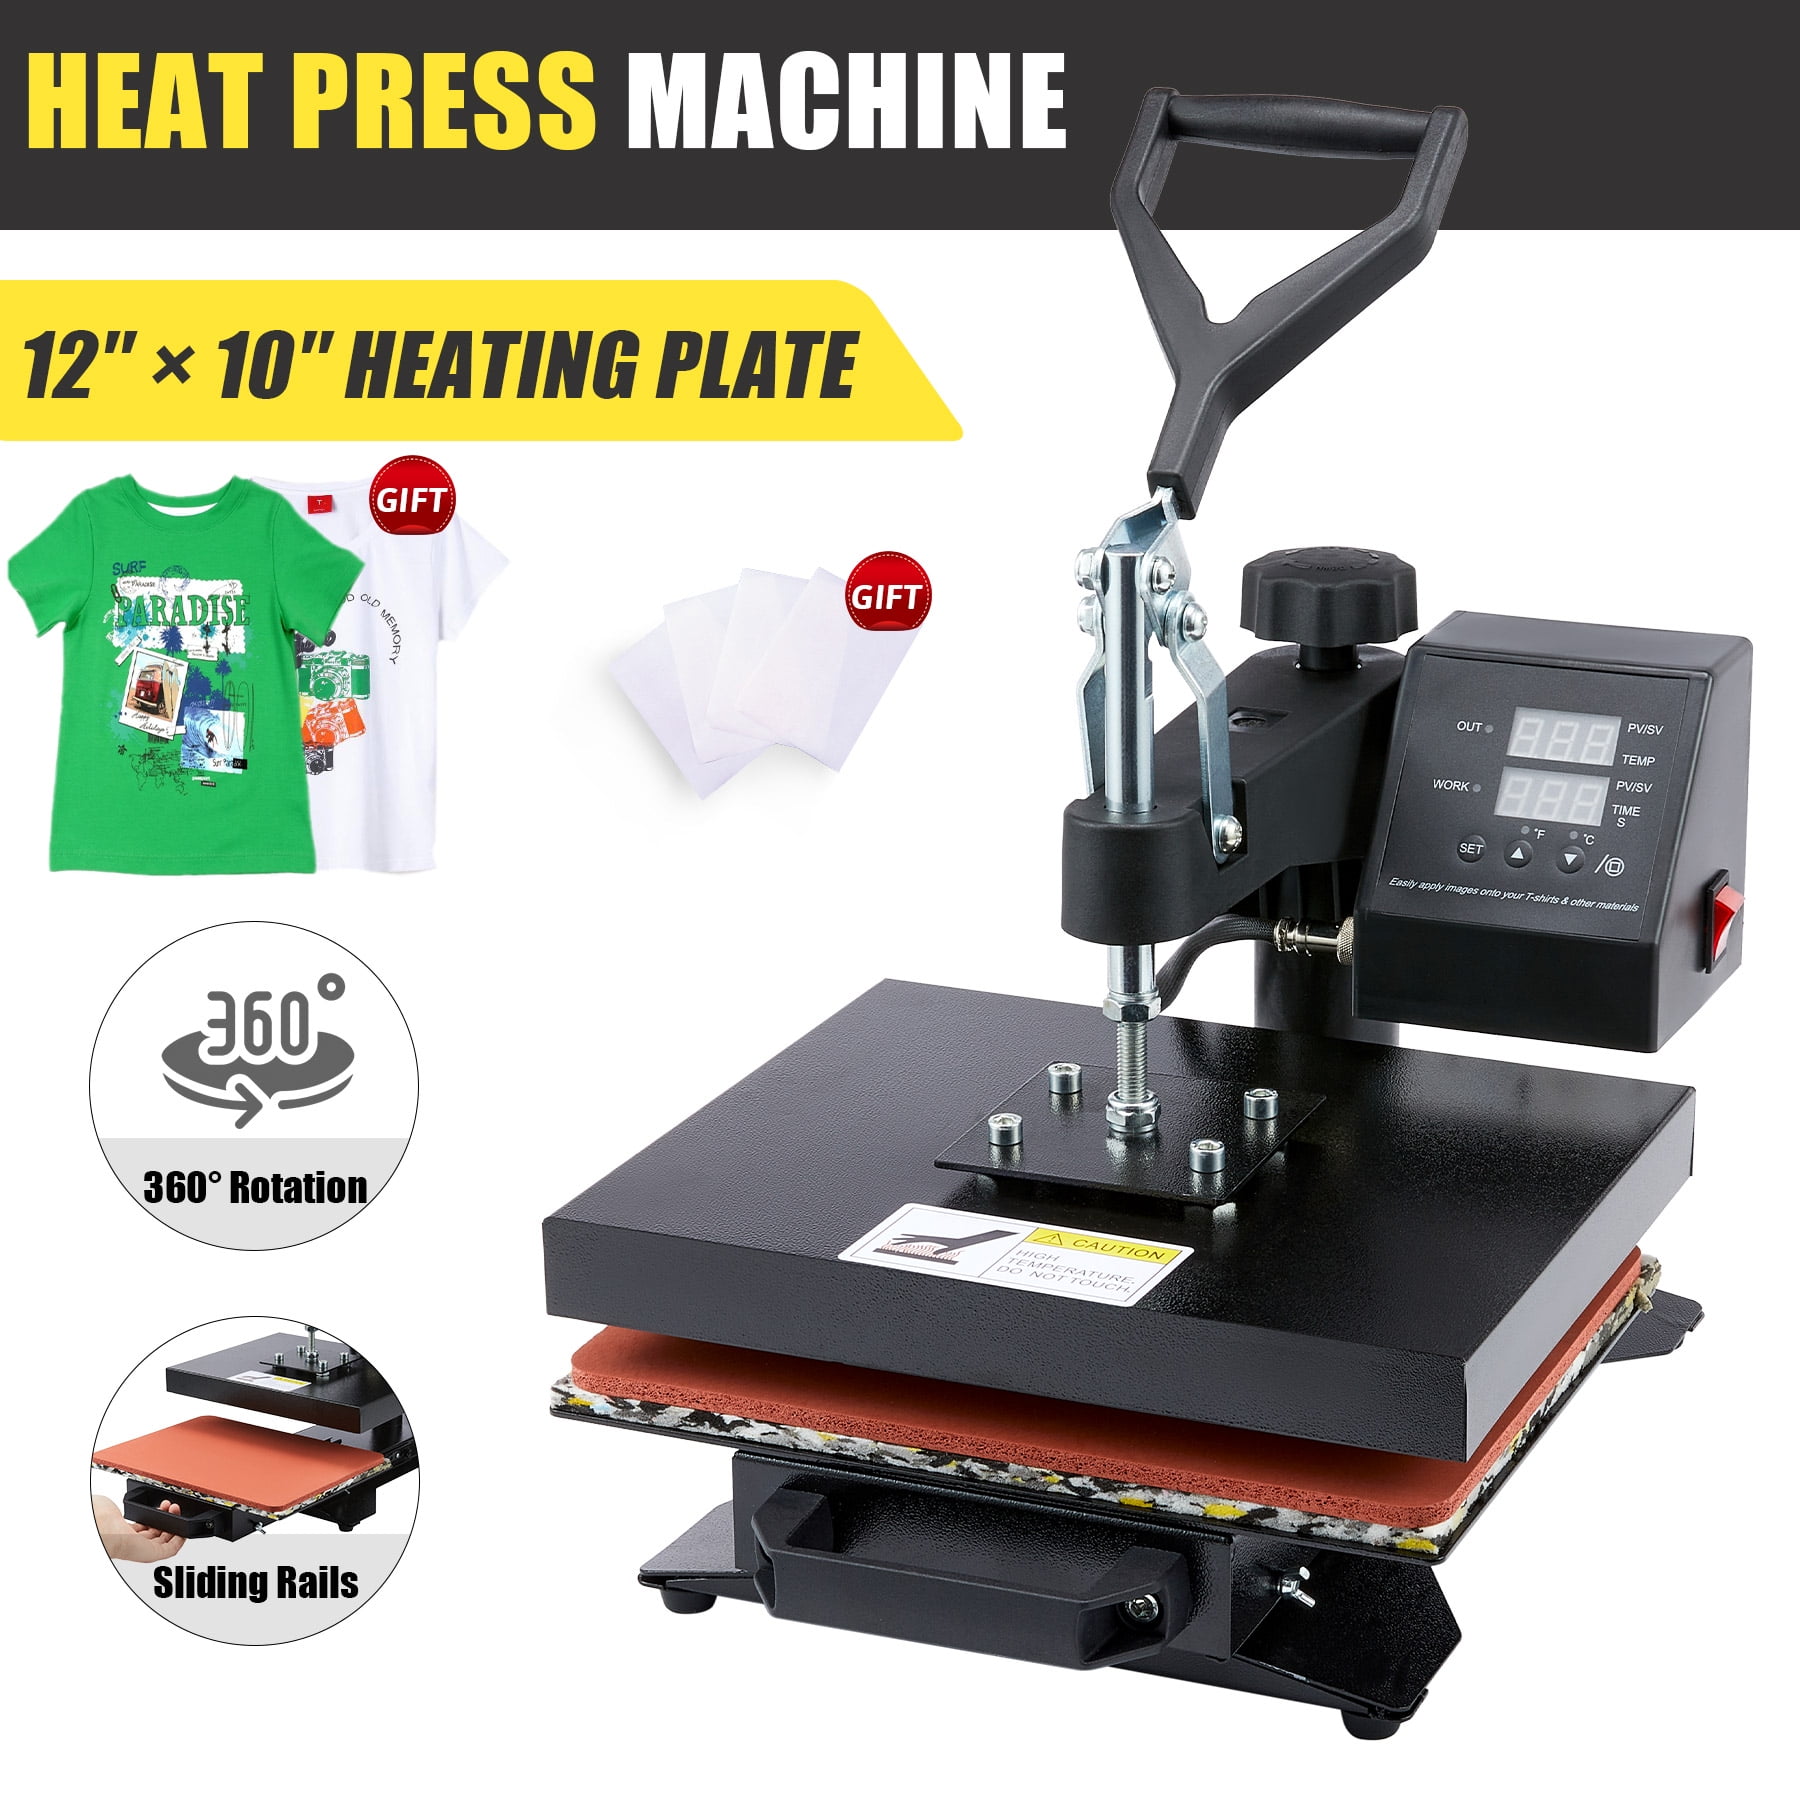 Heat Press Machine 16x20 Auto Open Clamshell T Shirt Press for Clothes Bags More